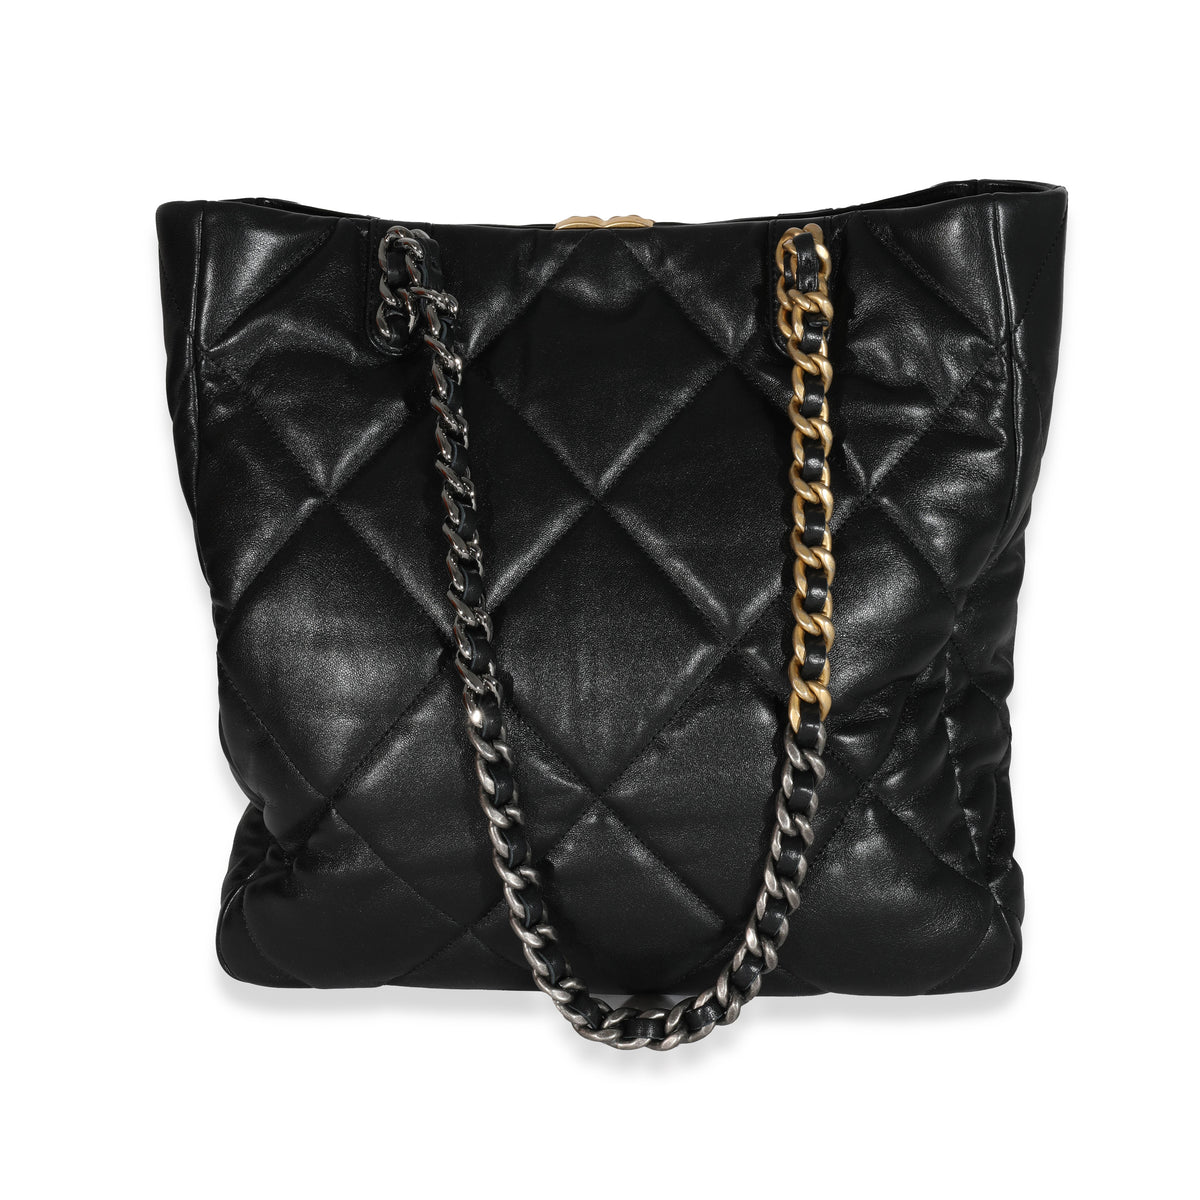 Review: Chanel 19 shopping bag tote in black lambskin 